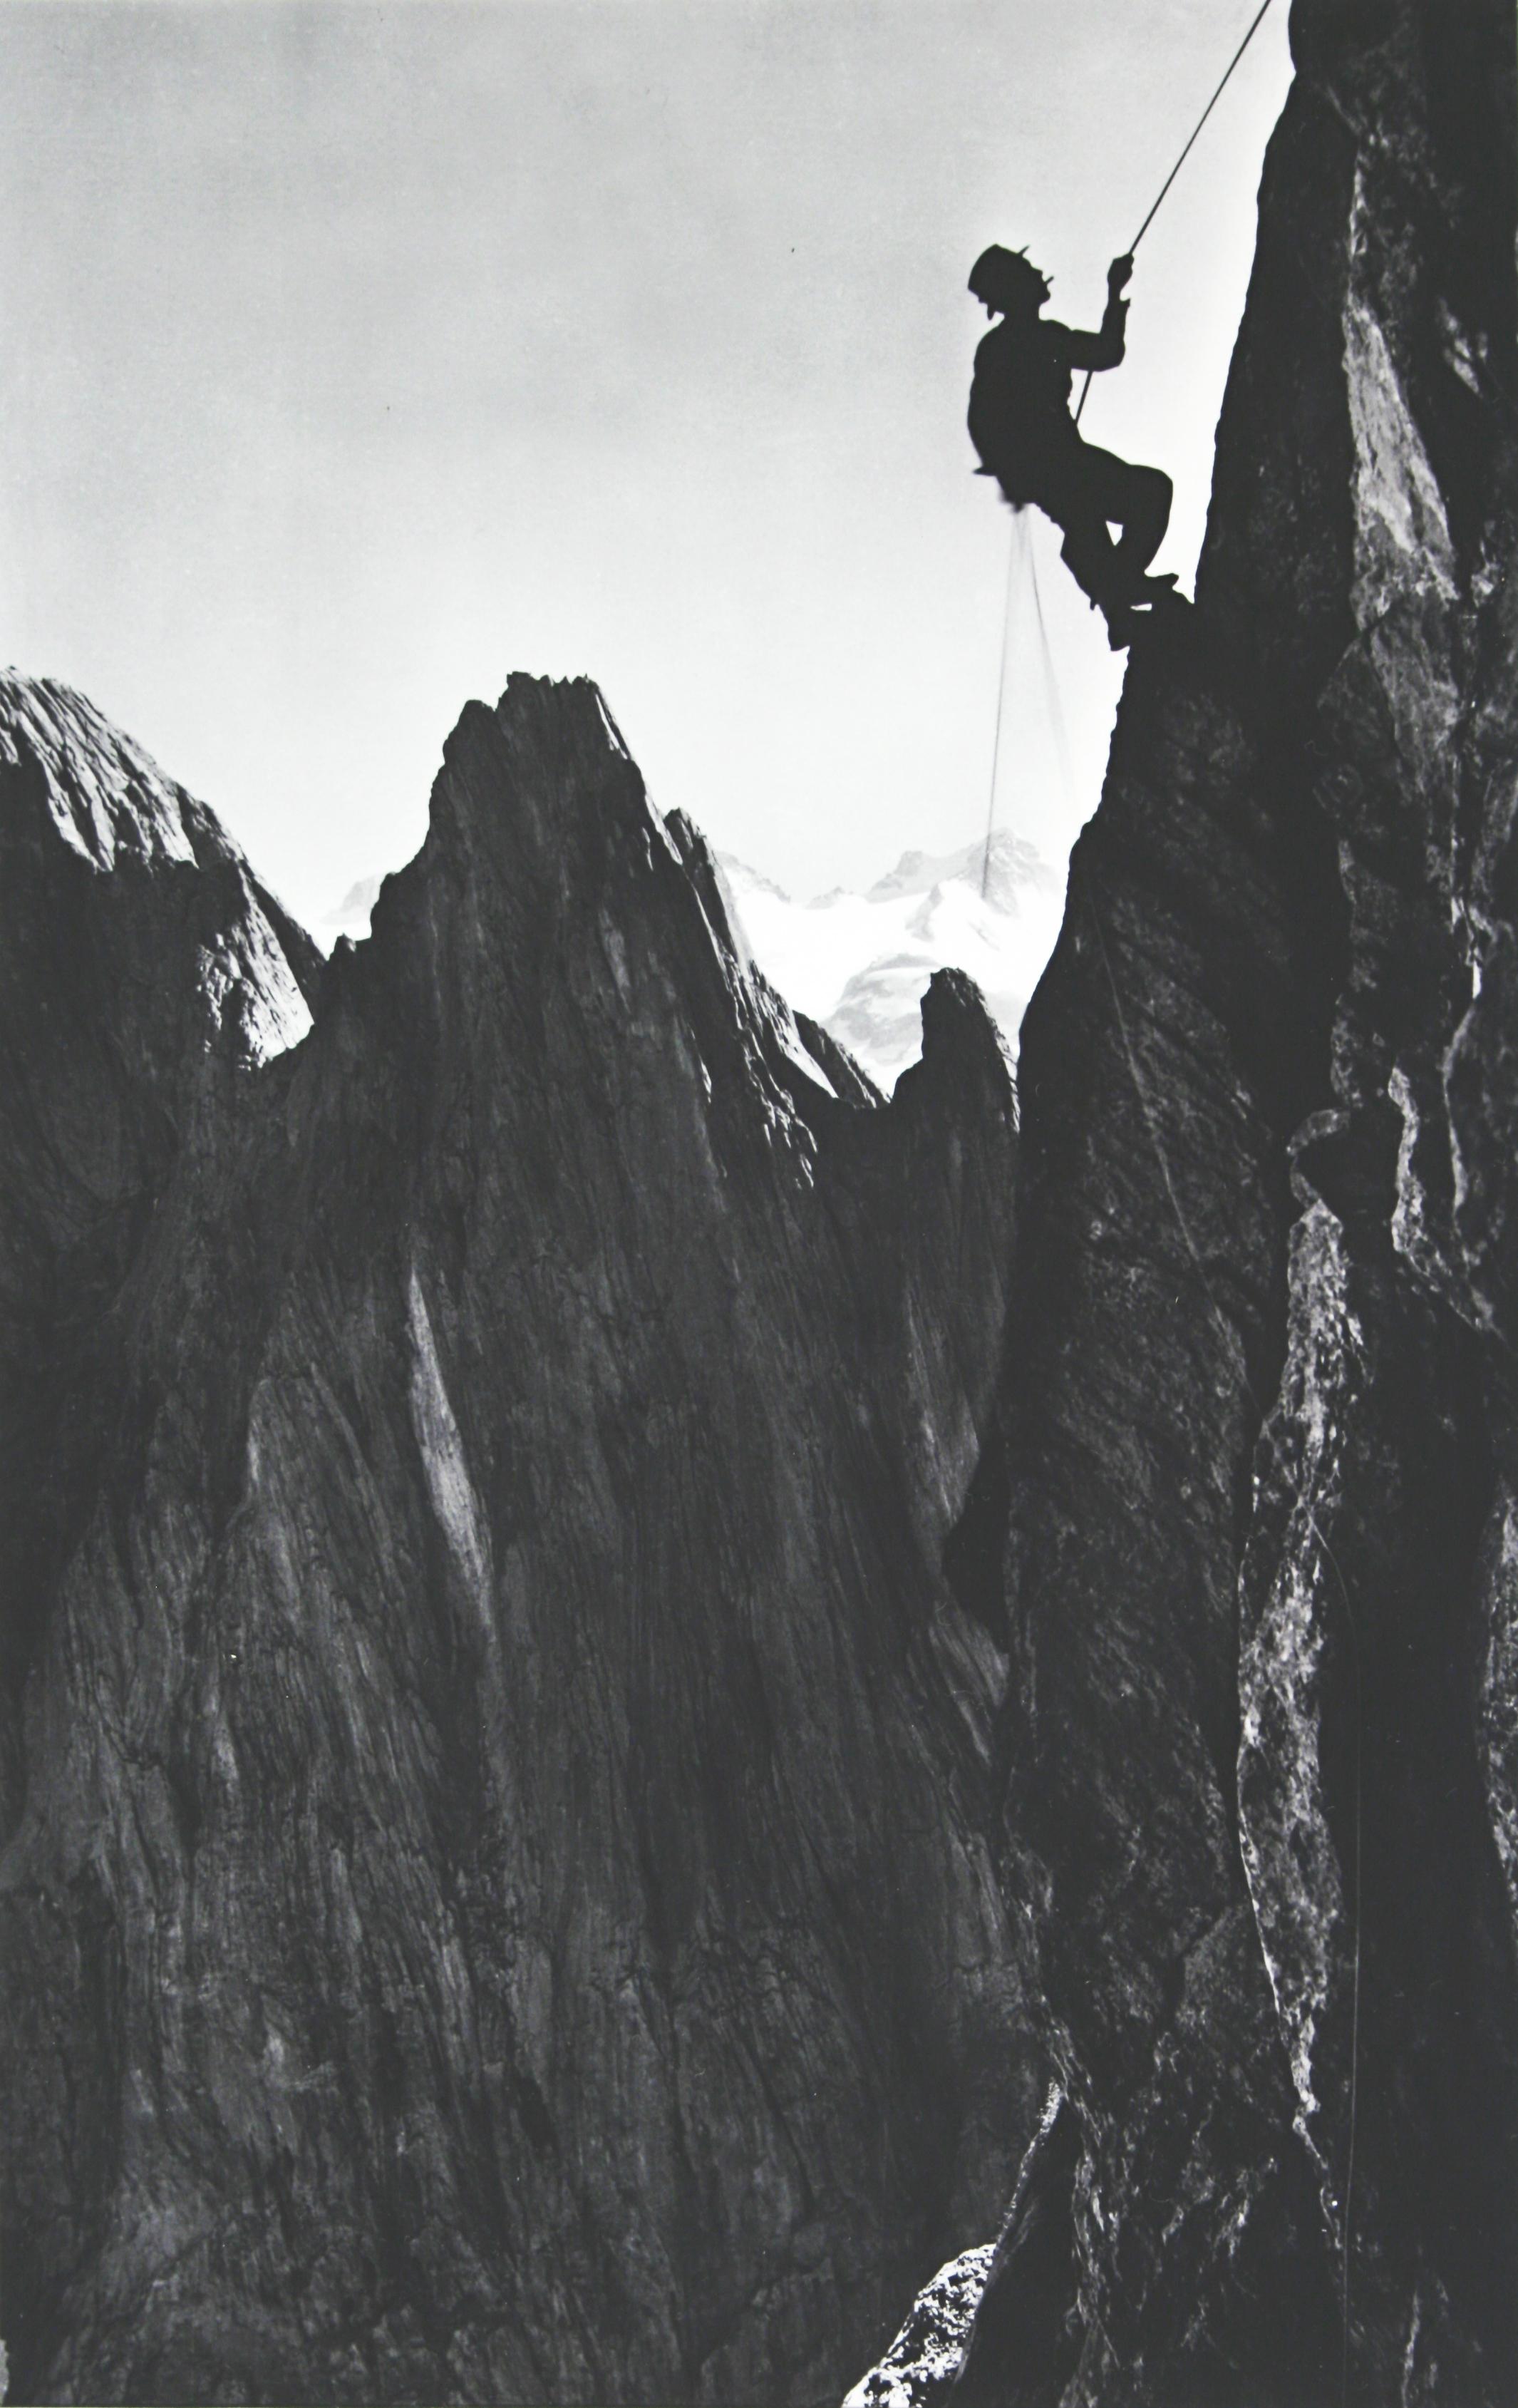 Vintage Mountaineering Foto.
CLIMBER